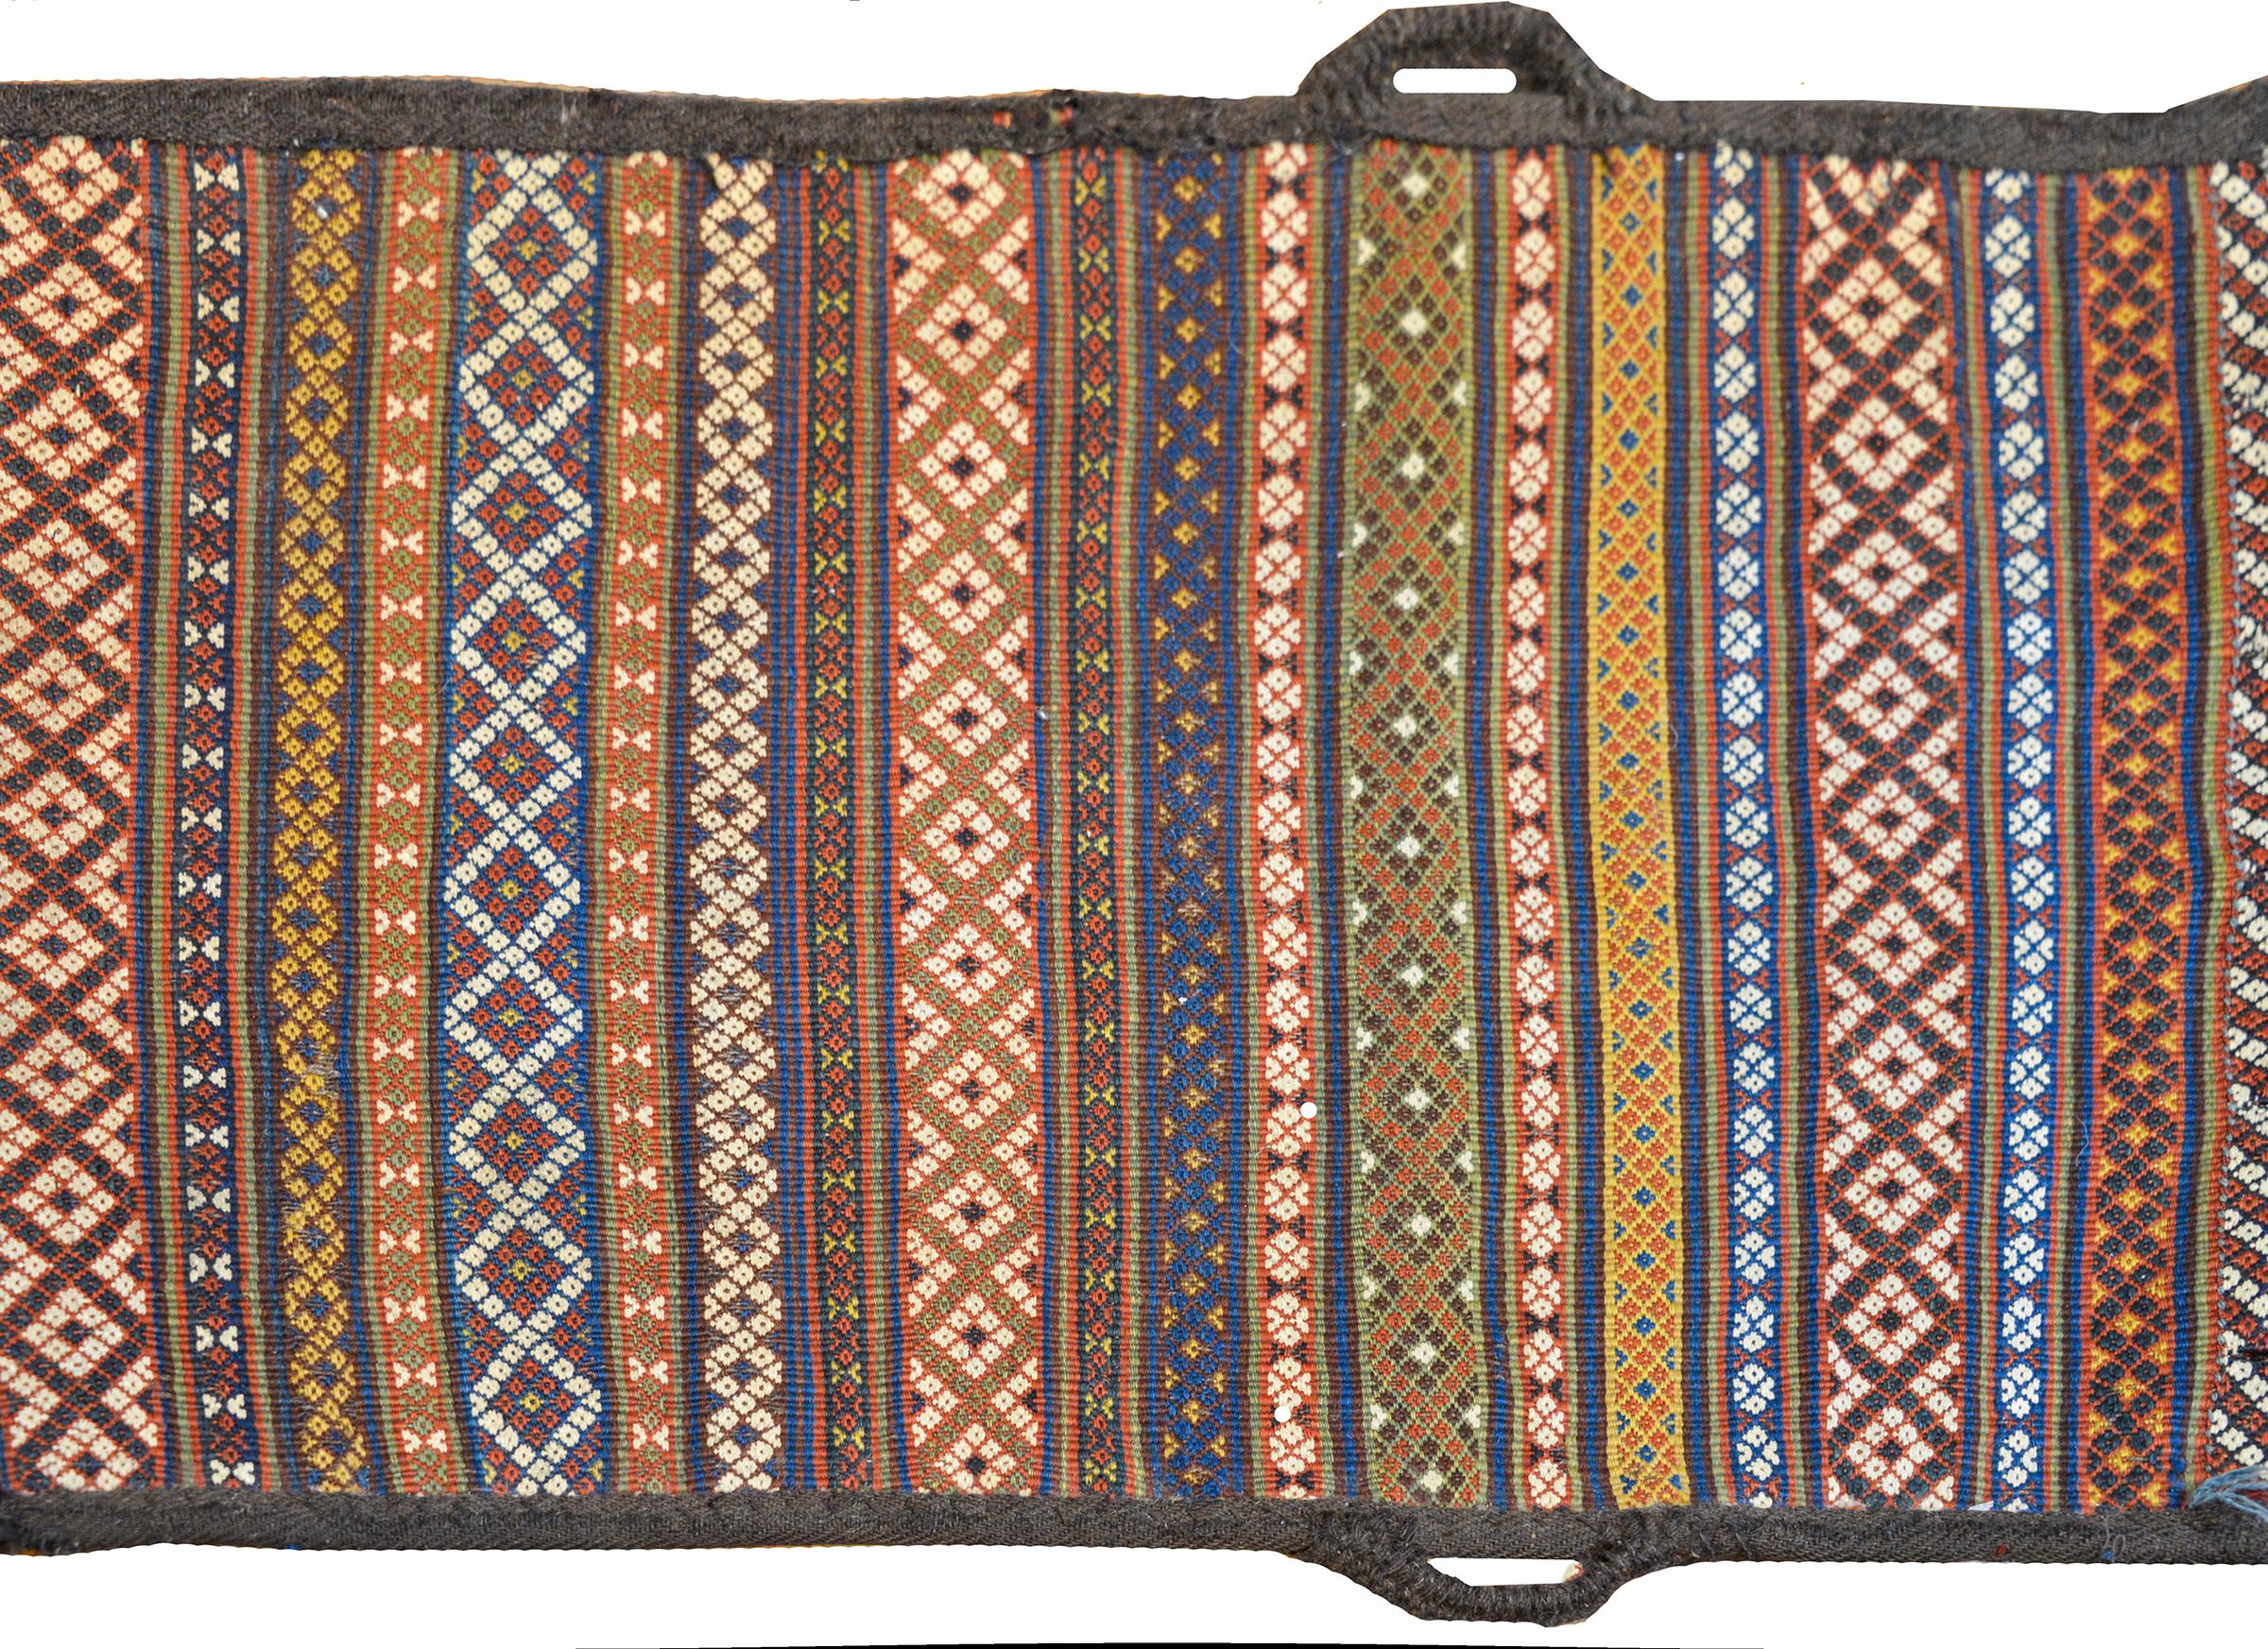 A fantastic early 20th century Persian Shahsevan bag face rug with an intricately woven pattern with multicolored stripes each woven with a geometric lattice pattern. The loops on the sides are original and relate to it's use as a saddle bag.